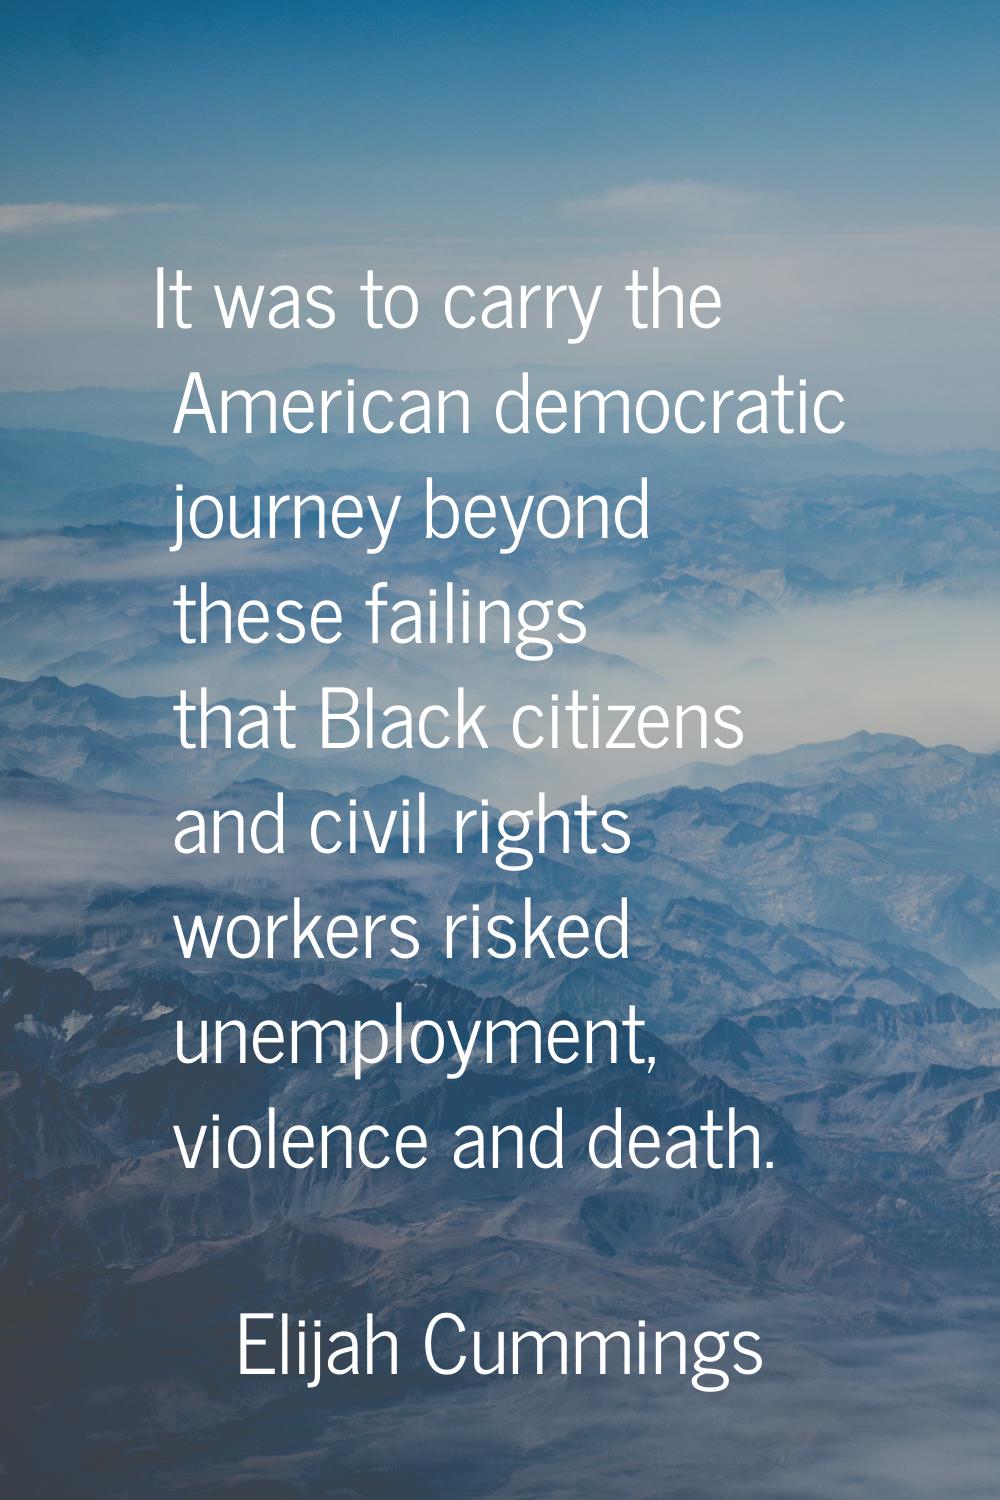 It was to carry the American democratic journey beyond these failings that Black citizens and civil